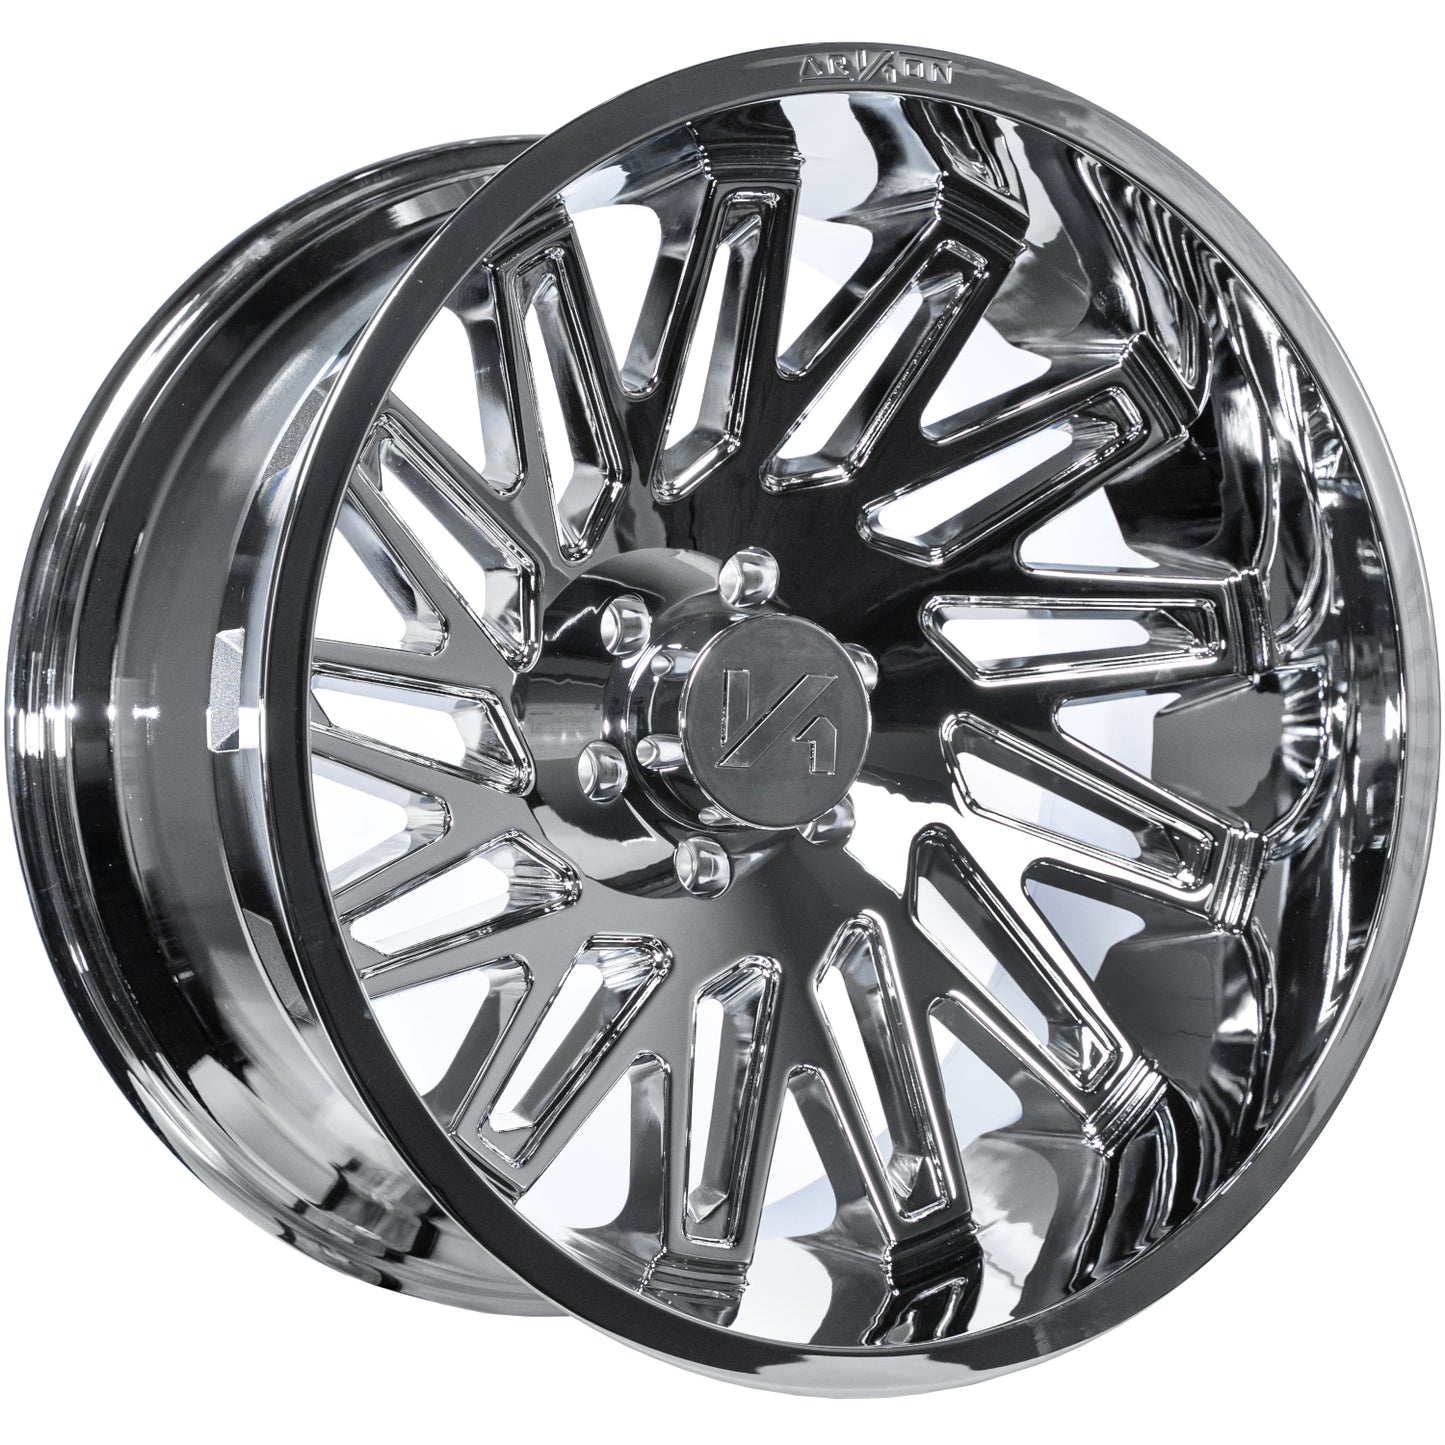 Armstrong Off Road Wheels Chrome 22x12 Right 6x5.5 -51 108mm